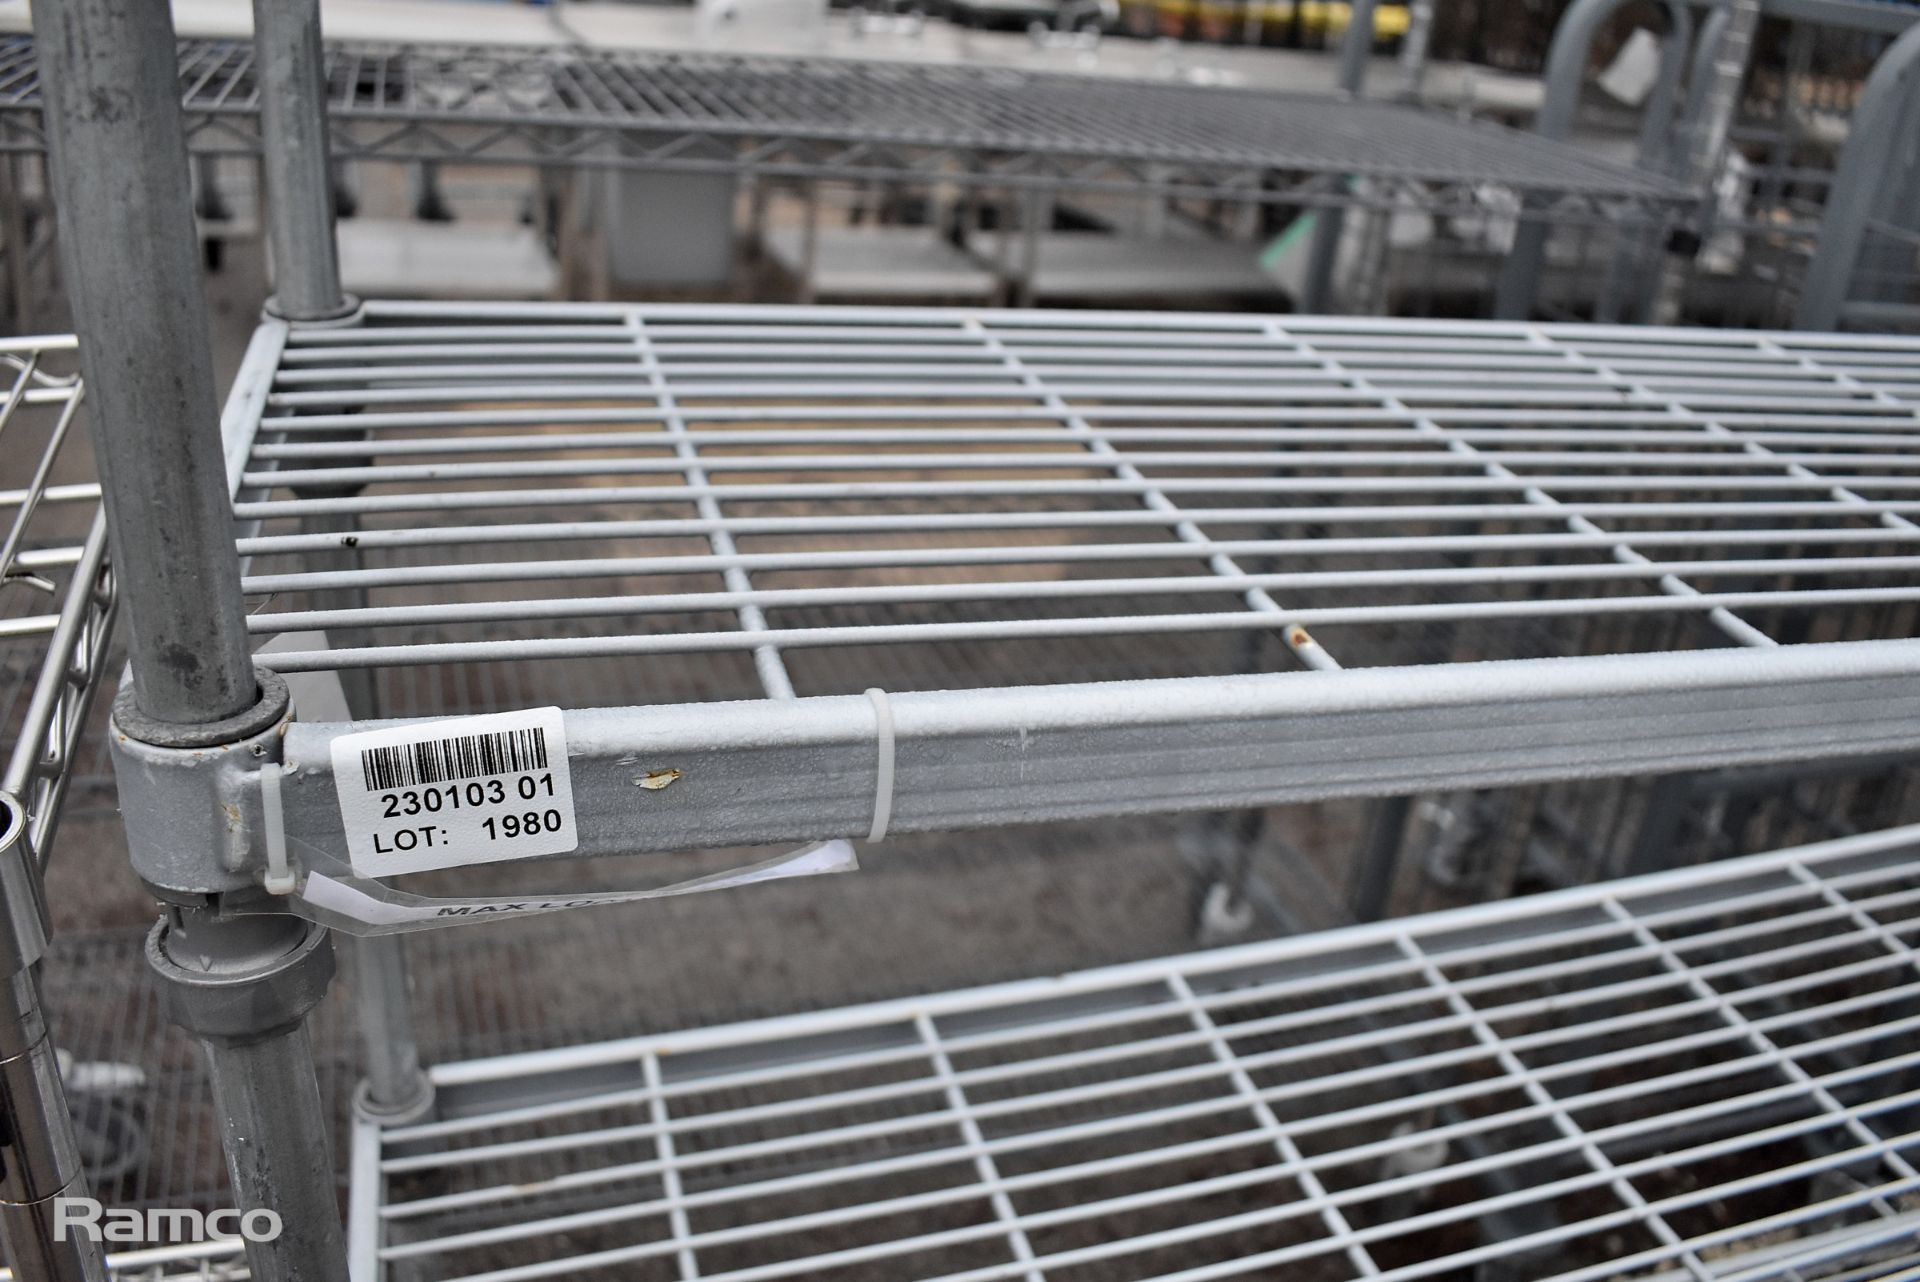 Stainless steel 3 tier wire racking - L153 x W38 x H152cm - Image 3 of 3